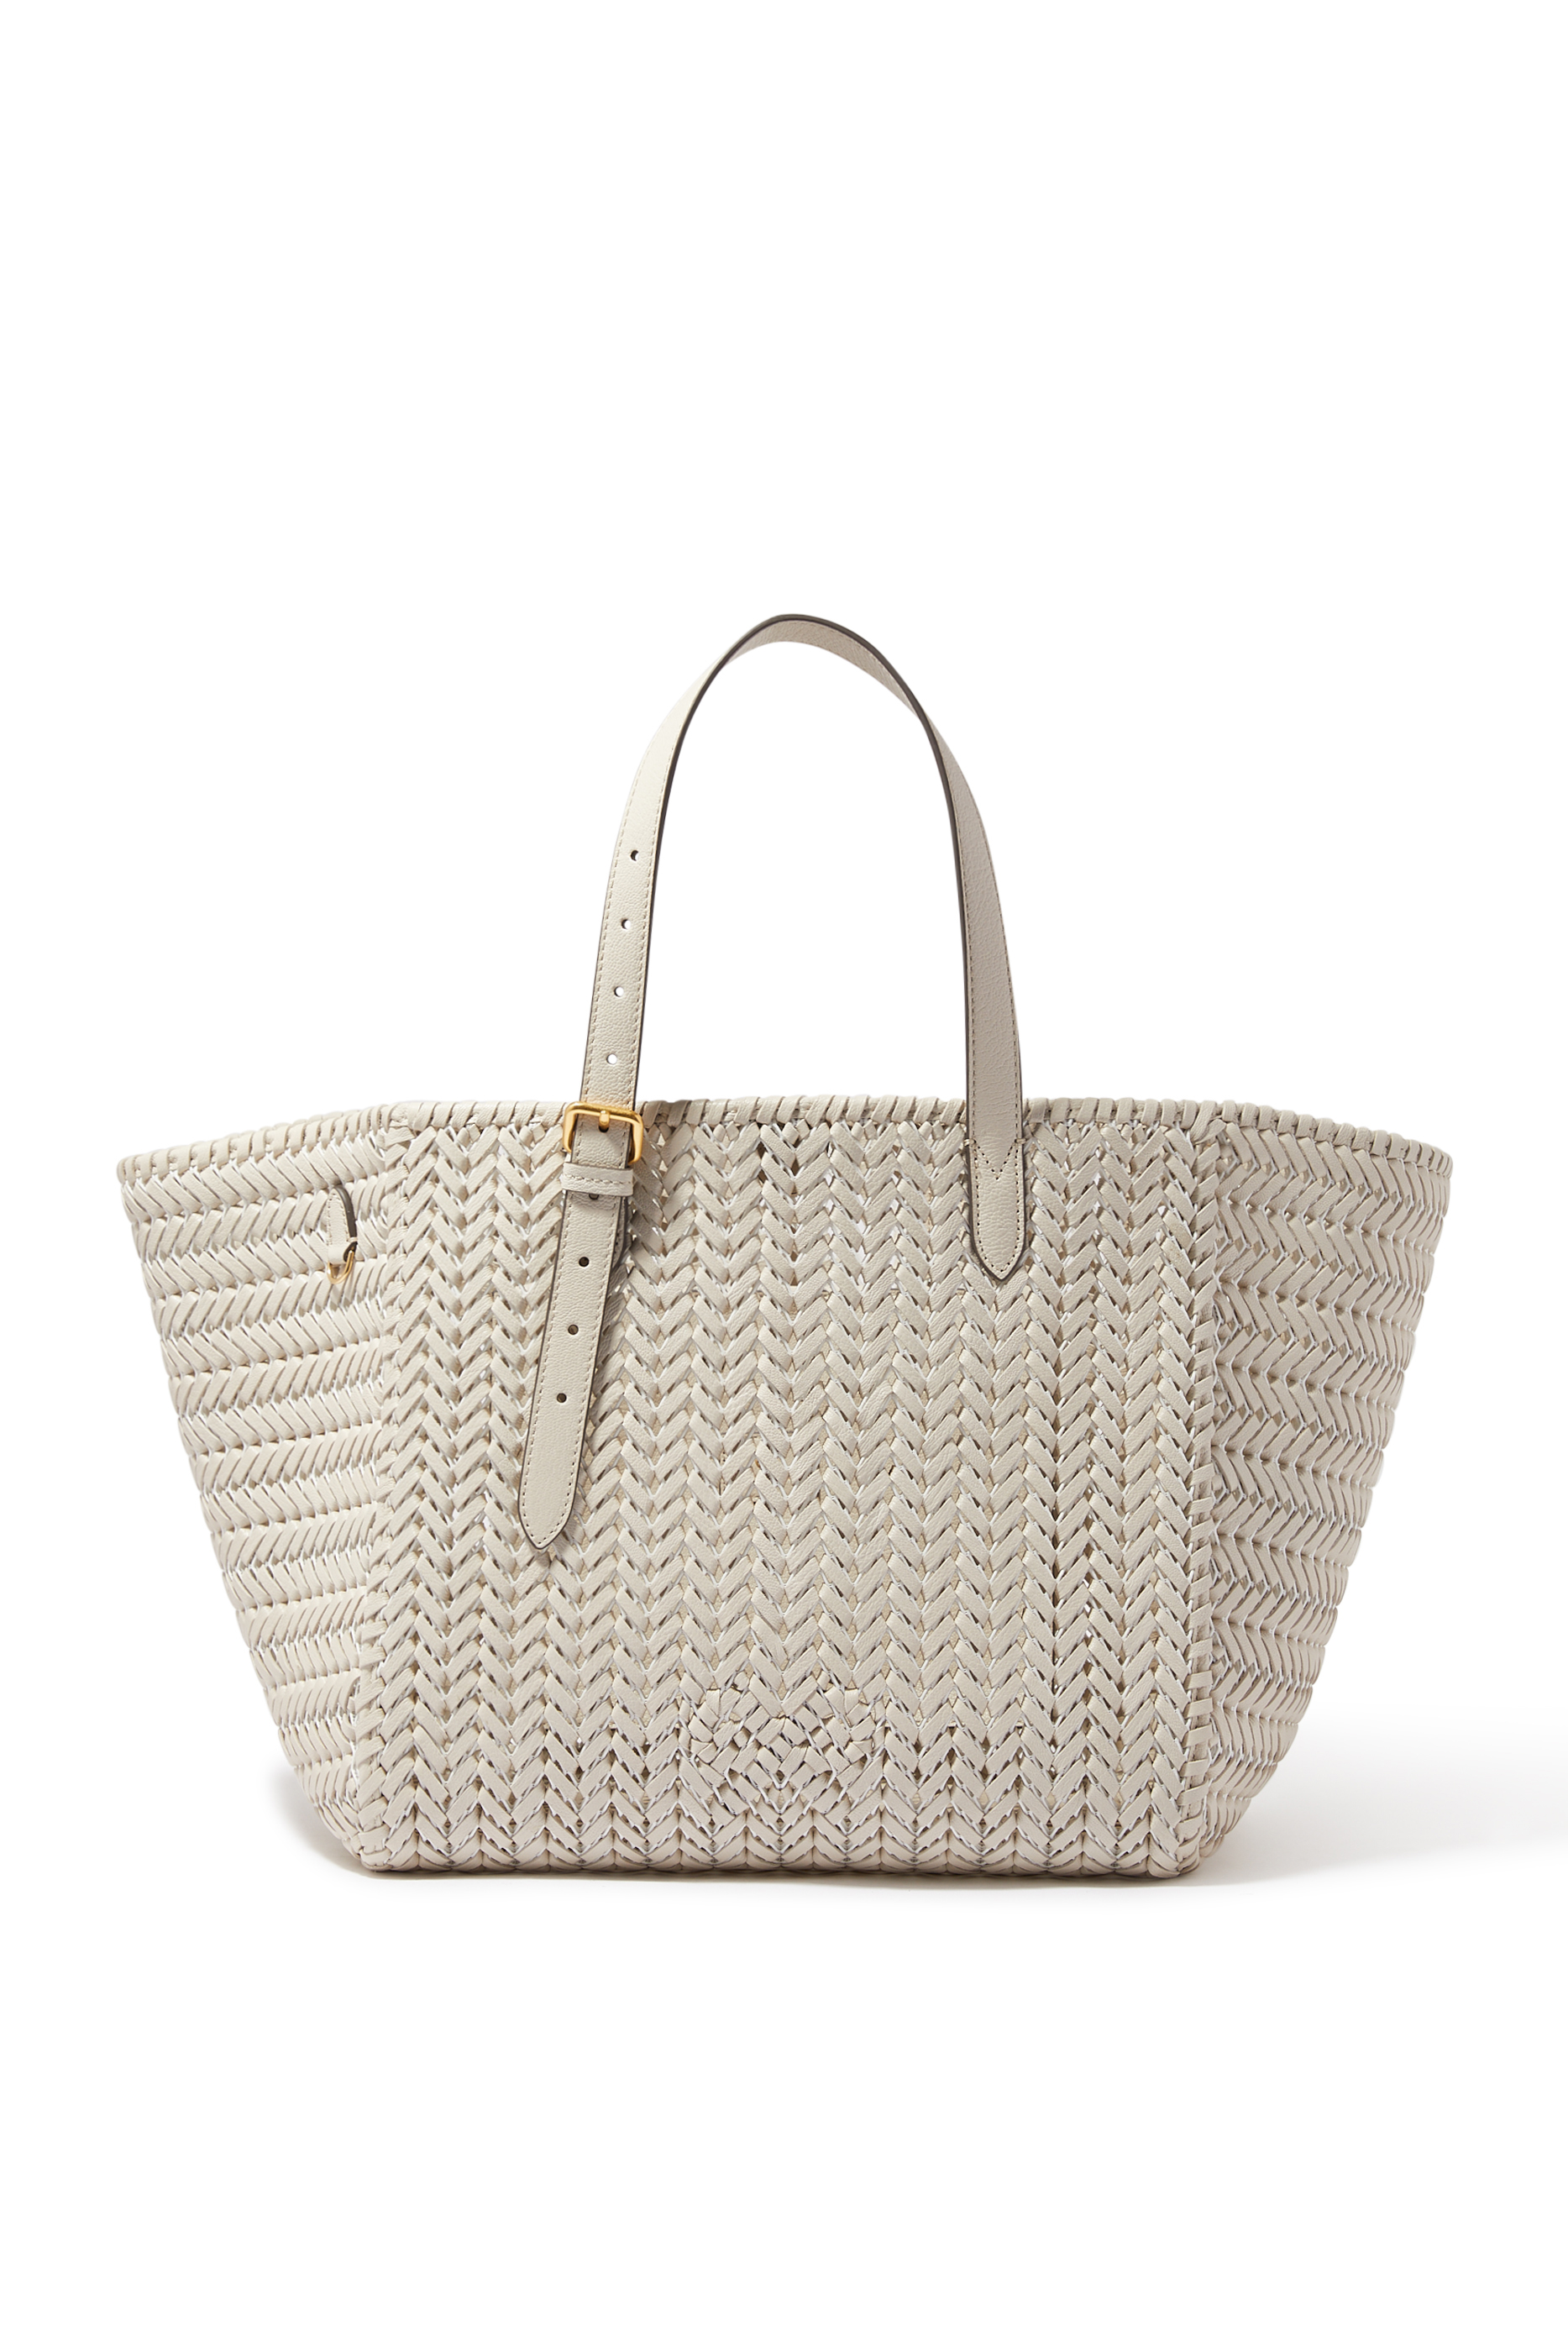 Buy Anya Hindmarch The Neeson Square Tote for Womens | Bloomingdale's UAE